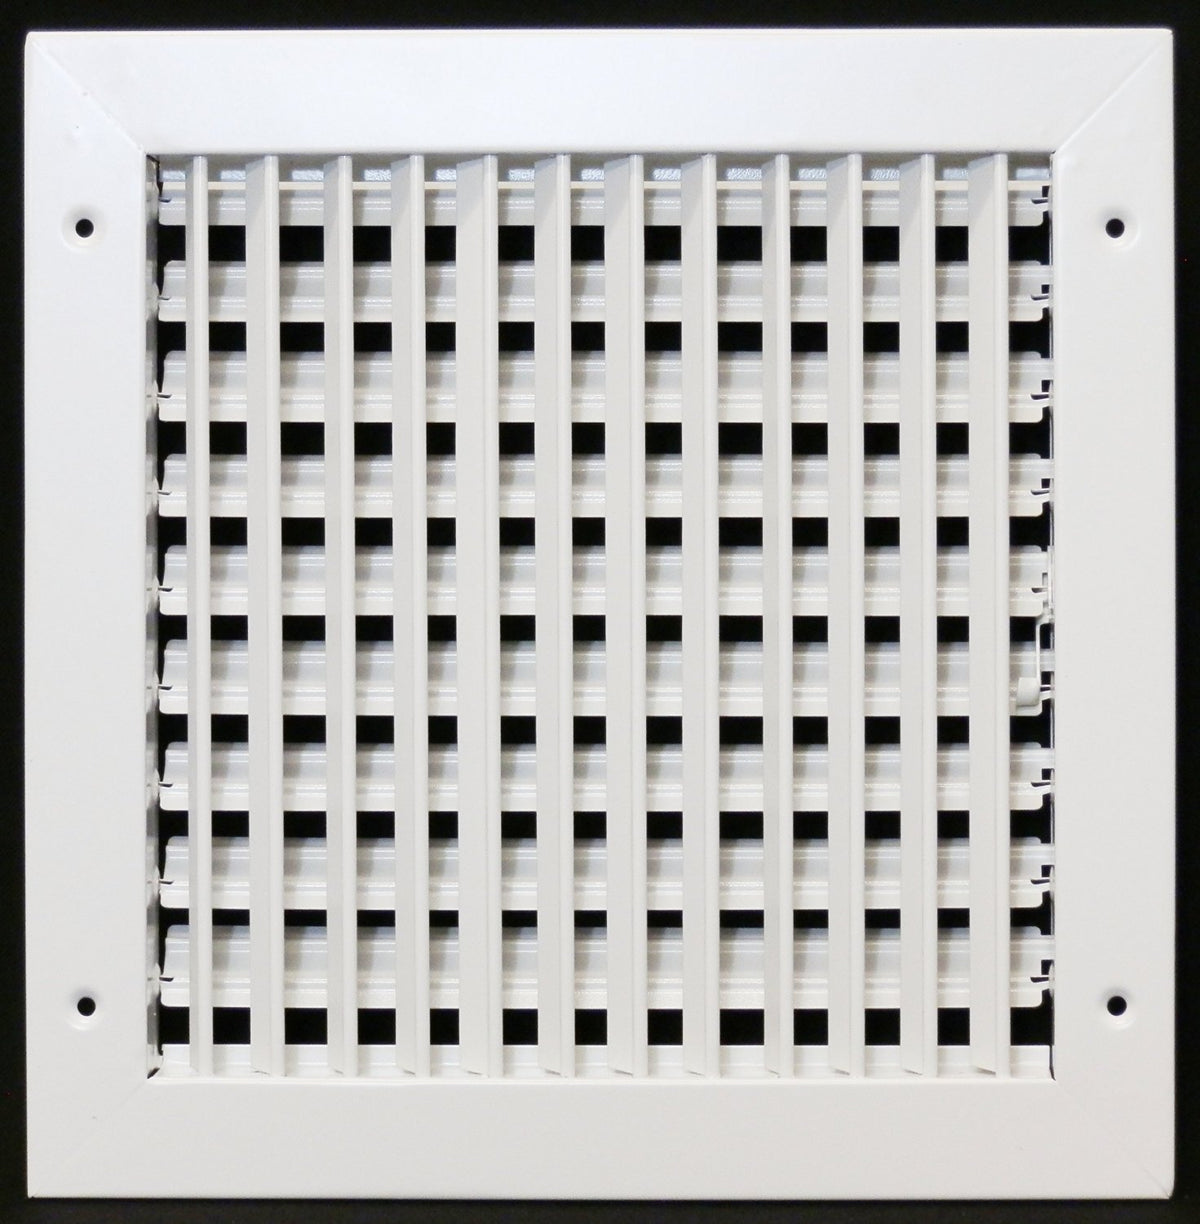 16&quot; X 14&quot; ADJUSTABLE AIR SUPPLY DIFFUSER - HVAC Vent Duct Cover Sidewall or Ceiling